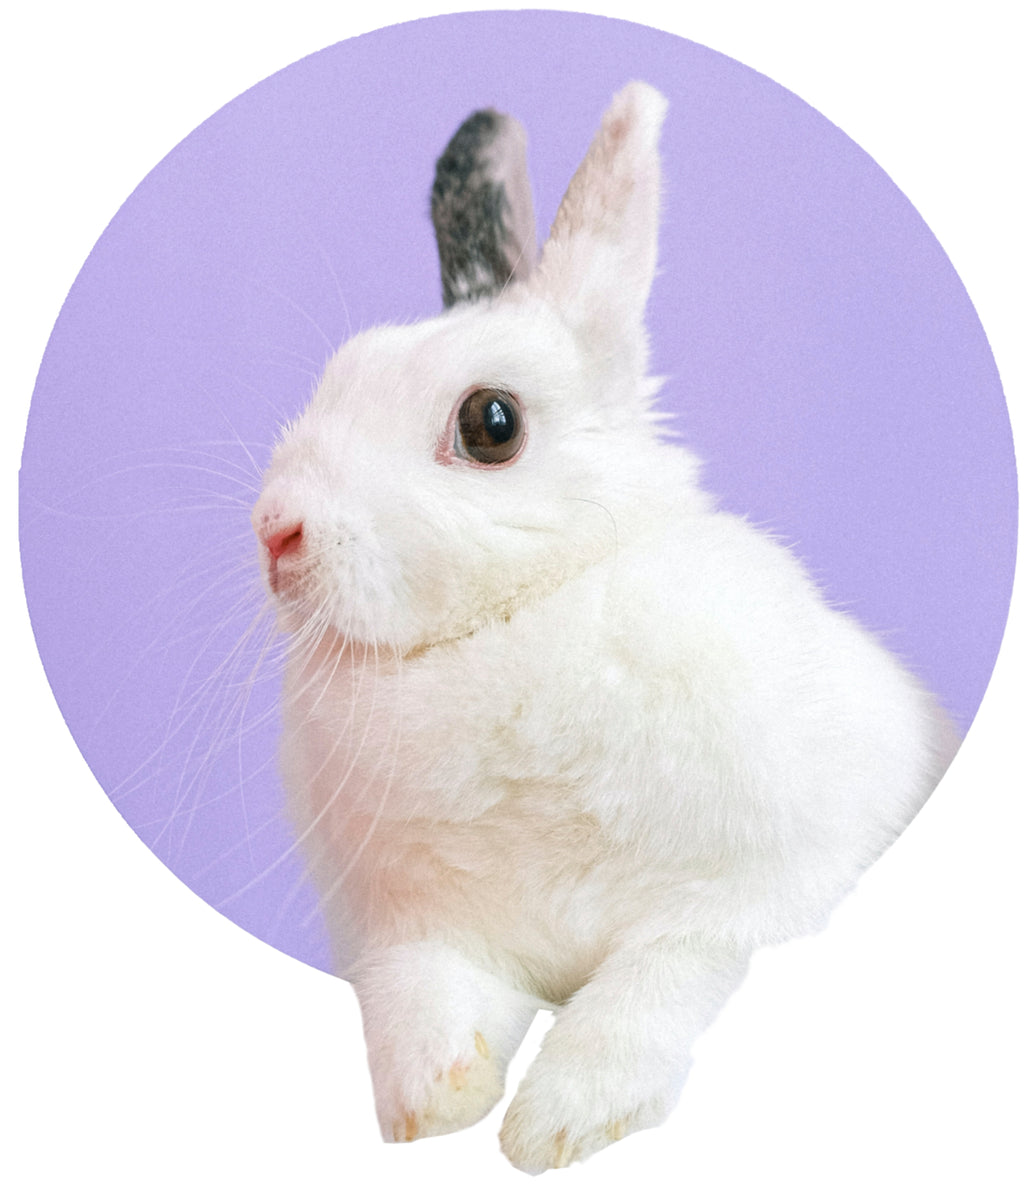 Wildlife officials warn about buying bunnies as Easter gifts | The Seattle  Times